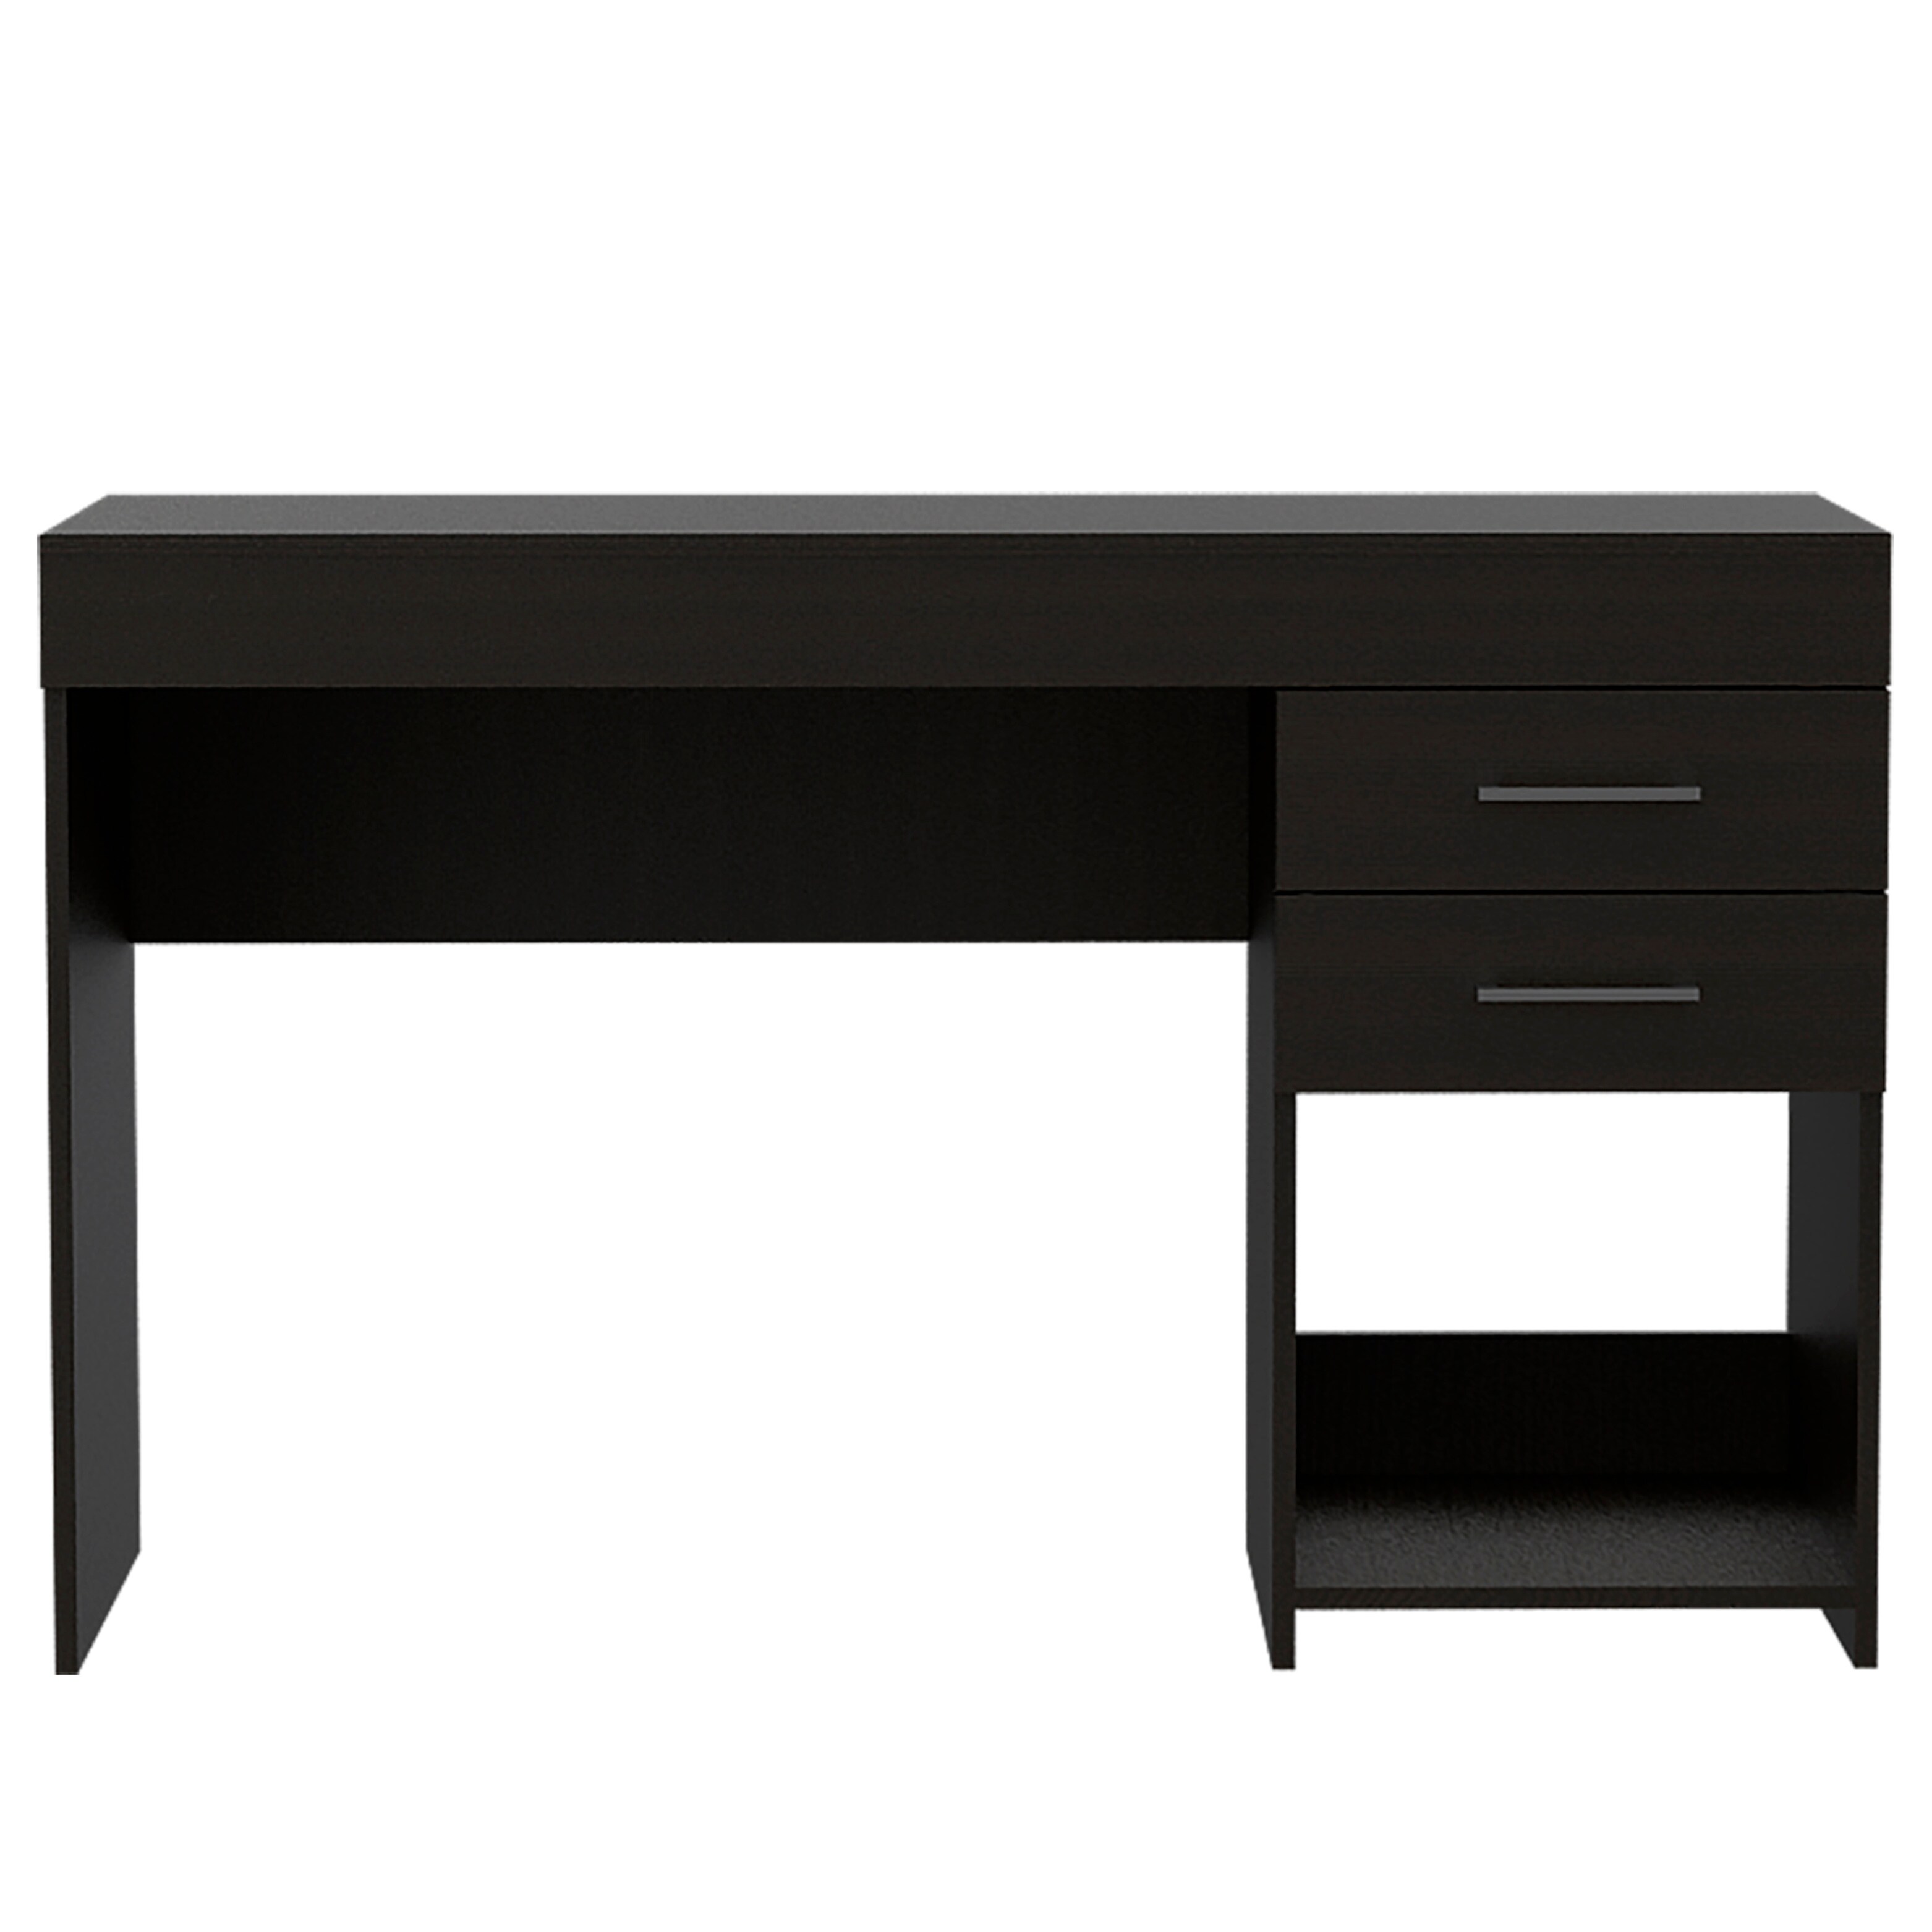 https://ak1.ostkcdn.com/images/products/is/images/direct/f35df0f489a38ff833045499cd534155f903bff4/Computer-Desk-with-2-Drawers-and-1-Open-Storage-Compartments%2C-Wood-Writing-Home-Office-Workstation%2C-29.5%22-H-x-17.9%22D-x-47.2%22W.jpg